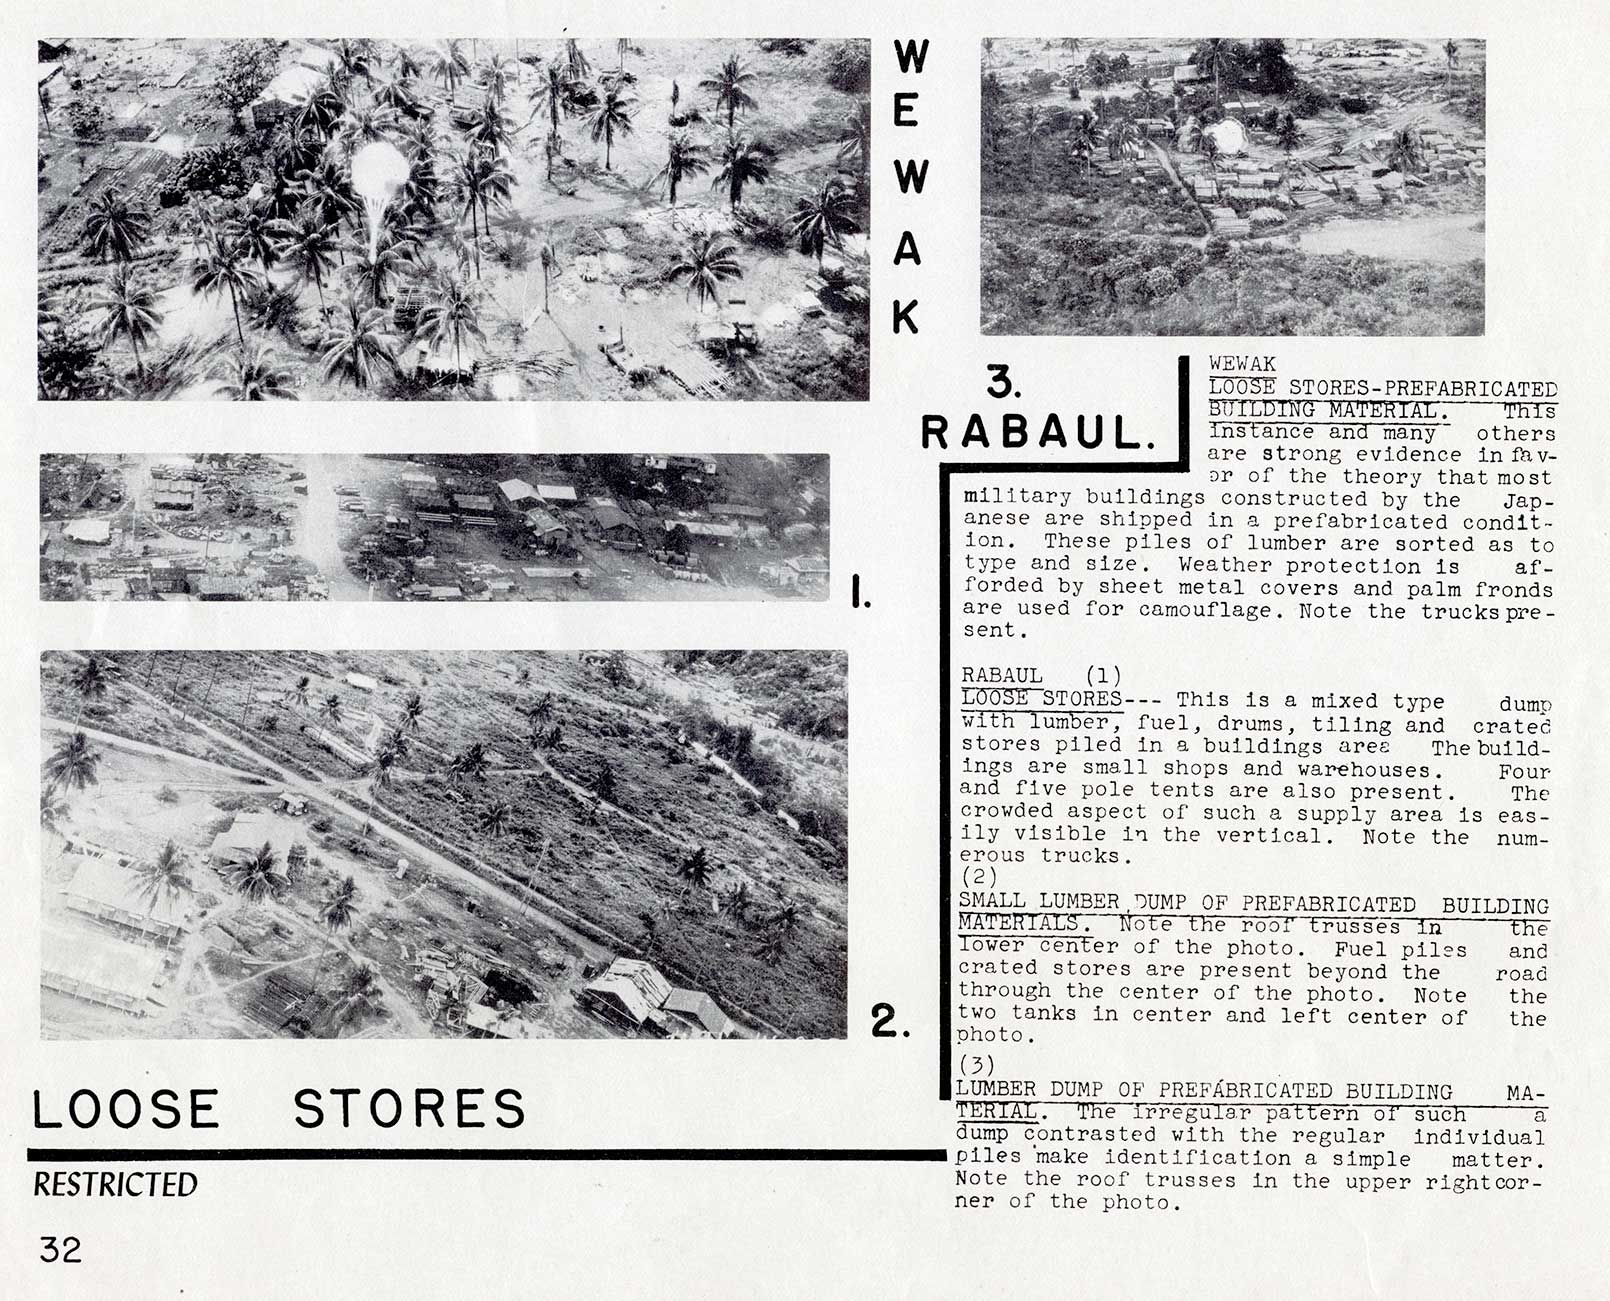 LOOSE STORES
WEWAK 
LOOSE STORES-PREFABRICATED  BUILDING MATERIAL. This instance and many others are strong evidence in favor of the theory that most military buildings constructed by the Japanese are shipped in a prefabricated condition. These piles of lumber are sorted as to type and size. Weather protection is afforded by sheet metal covers and palm fronds are used for camouflage. Note the trucks present.

RABAUL 
(1) LOOSE STORES--- This is a mixed type dump with lumber, fuel, drums, tiling and crated stores piled in a buildings area The buildings are small shops and warehouses. Four and five pole tents are also present. The crowded aspect of such a supply area is easily visible in the vertical. Note the numerous trucks.

(2)  SMALL LUMBER DUMP OF PREFABRICATED BUILDING  MATERIALS. Note the roof trusses in the lower center of the photo. Fuel piles and crated stores are present beyond the road through the center of the photo. Note the two tanks in center and left center of the photo.

(3)  LUMBER DUMP OF PREFABRICATED BUILDING MATERIAL. The irregular pattern of such a dump contrasted with the regular individual piles make identification a simple matter. Note the roof trusses in the upper right corner of the photo.
32
